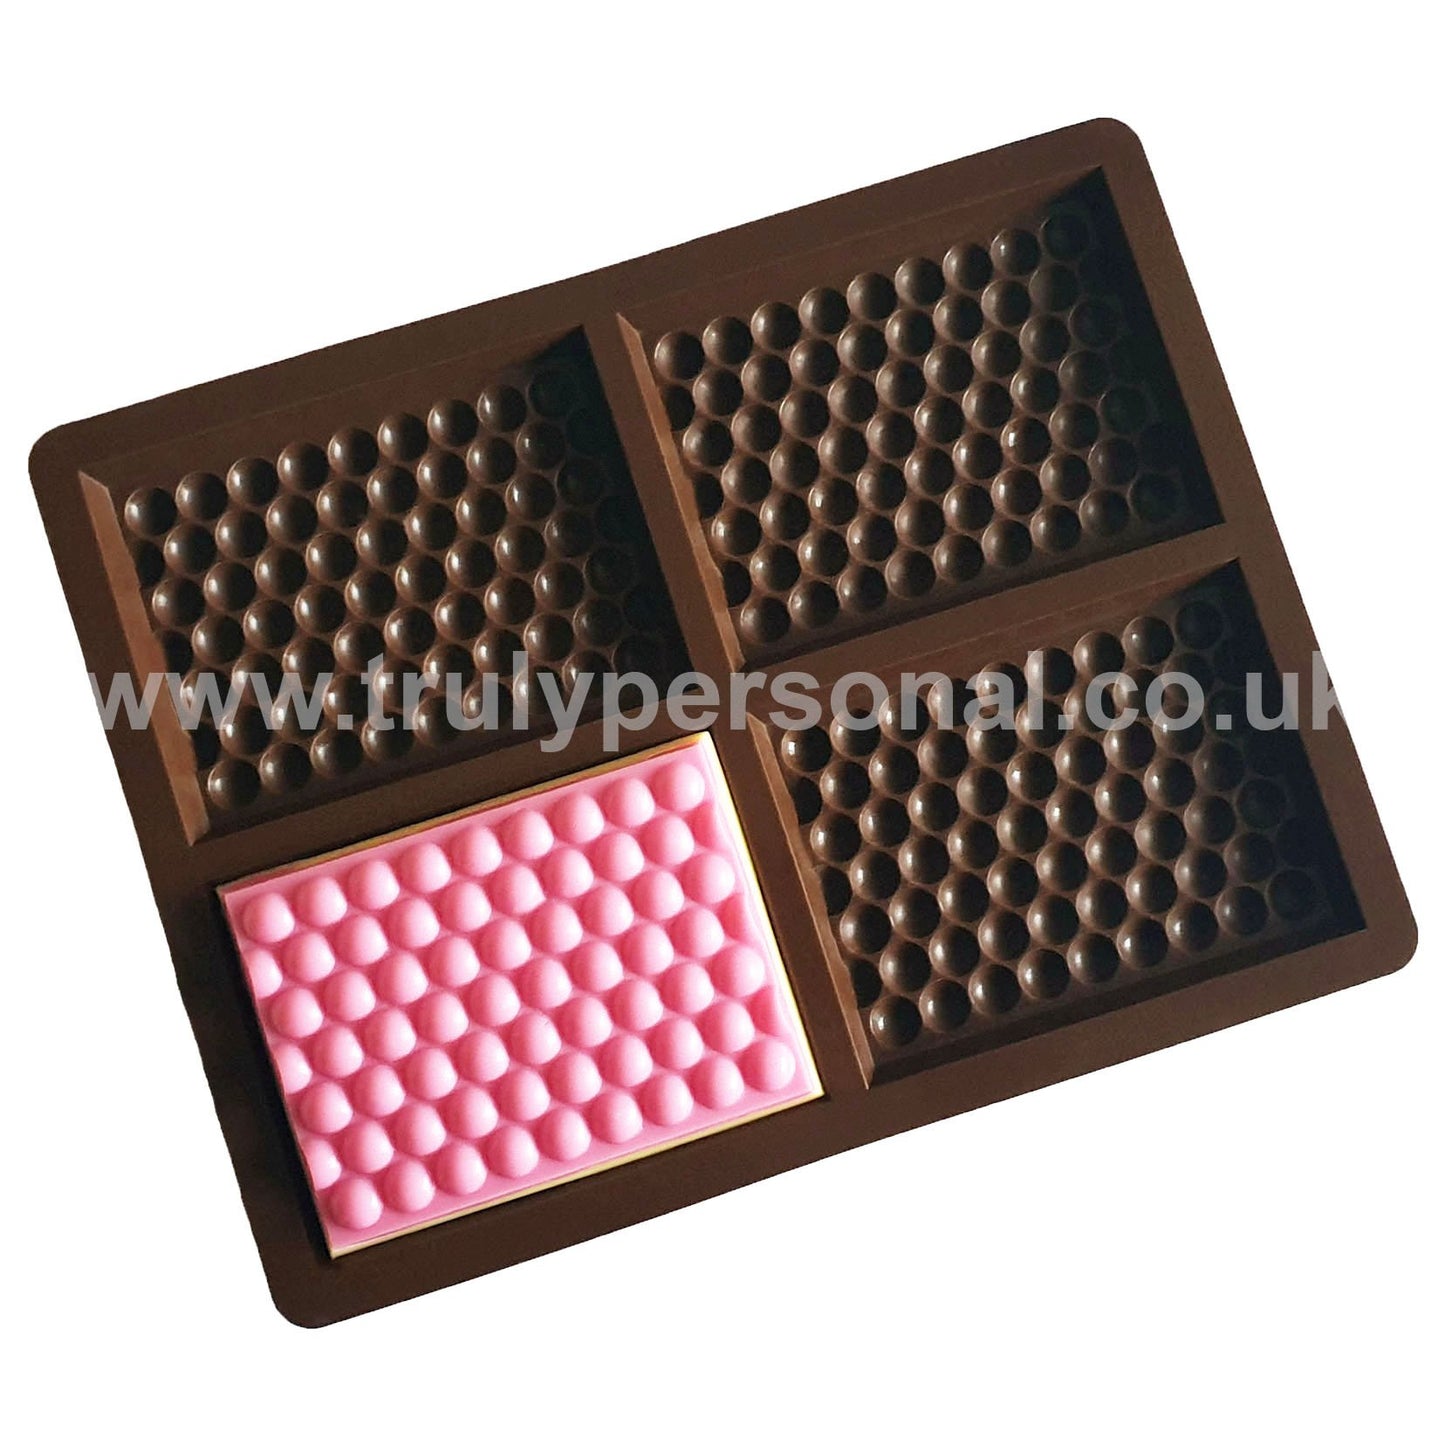 Bubble Bar Silicone Mould - 4 Cell | Wax Melts | Truly Personal Ltd